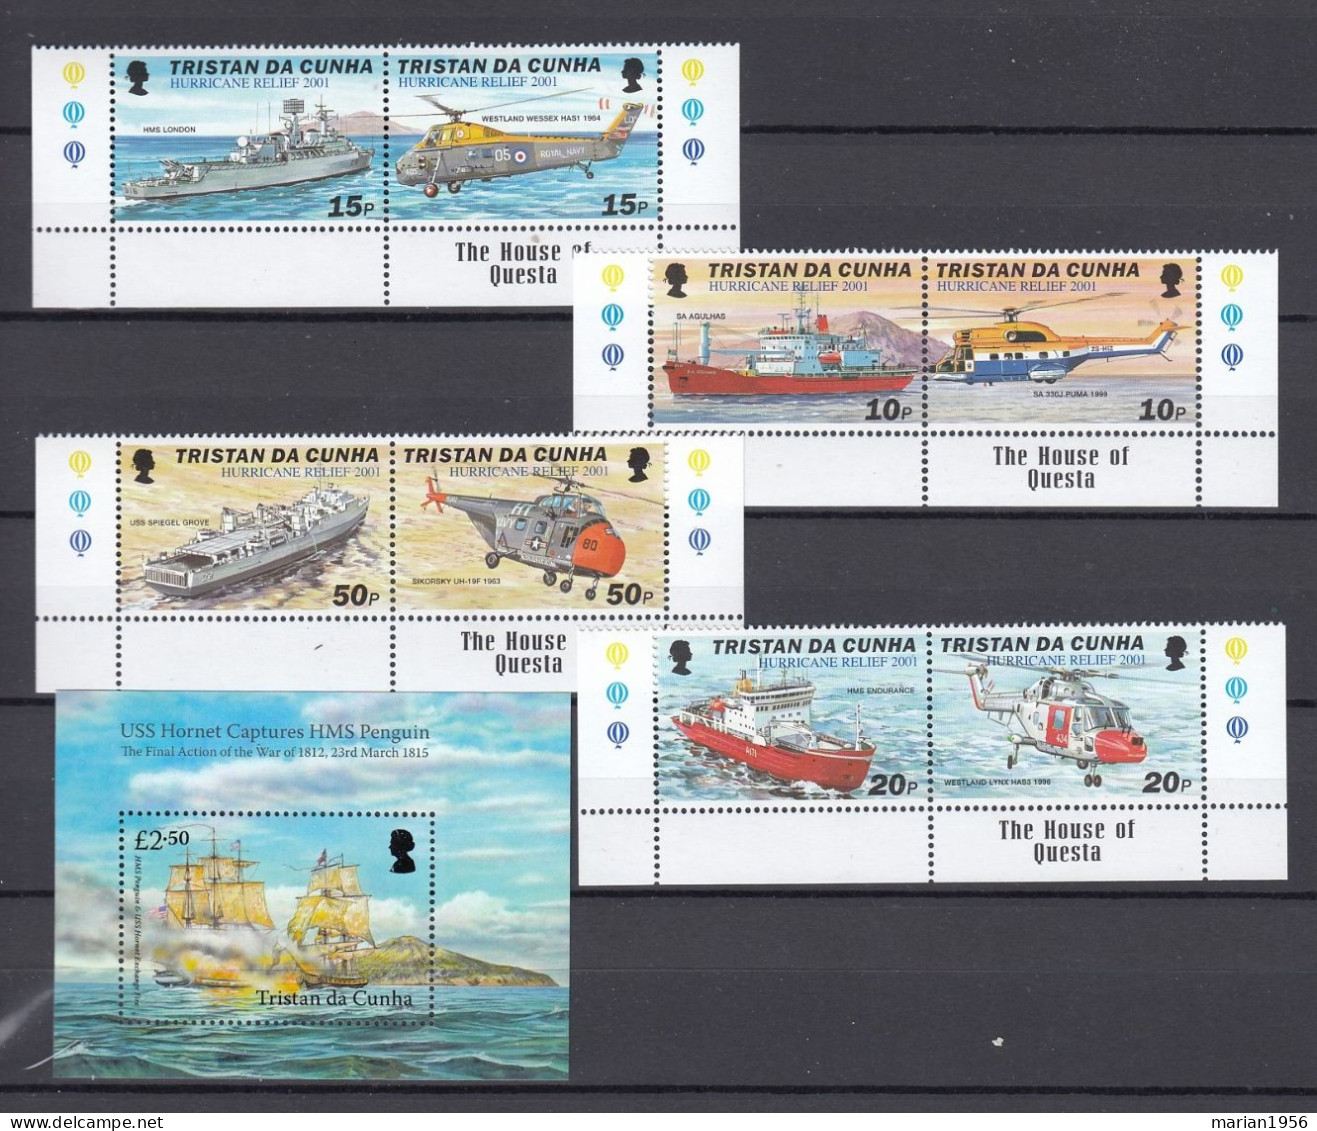 Tristan Da Cunha - Transport - NAVIRE,HELICOPTERES,BATEAUX - Mich.695/02 + BF - 35 Eur. - MNH - Sonstige (See)